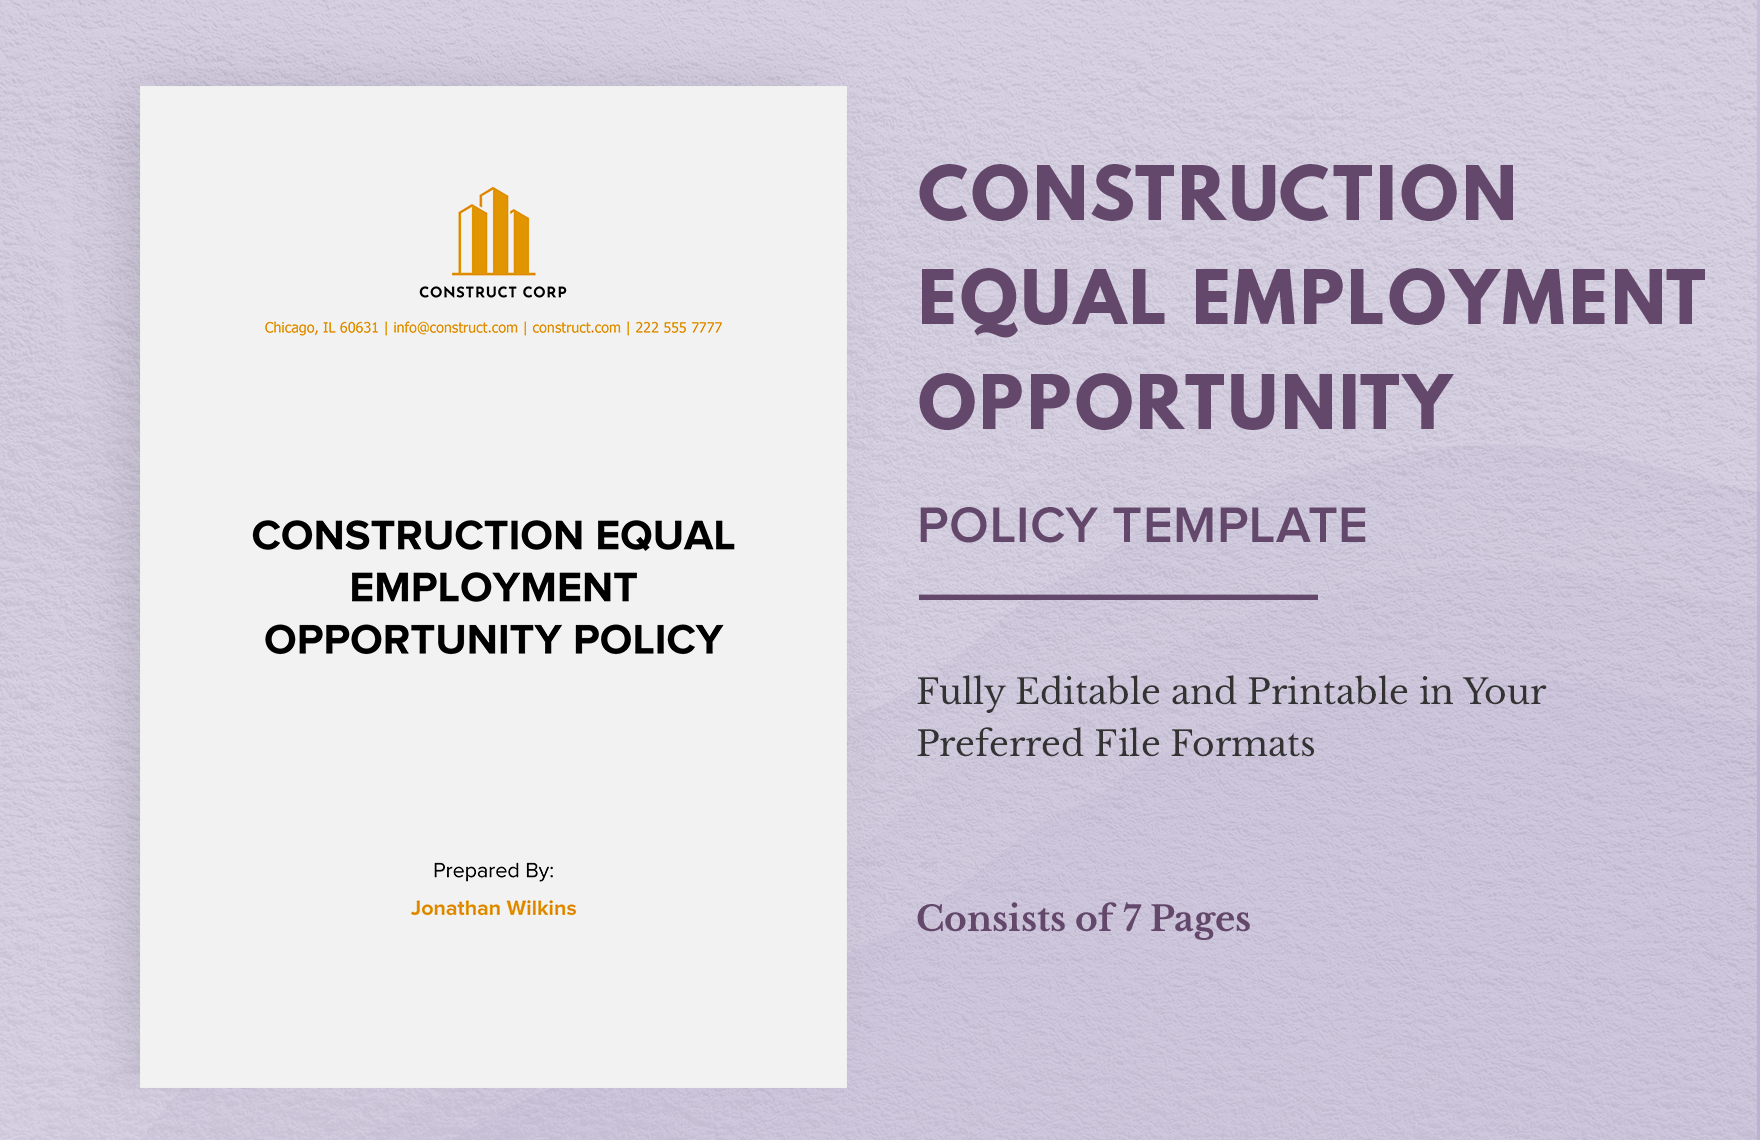 Construction Equal Employment Opportunity Policy Template in Word, Google Docs